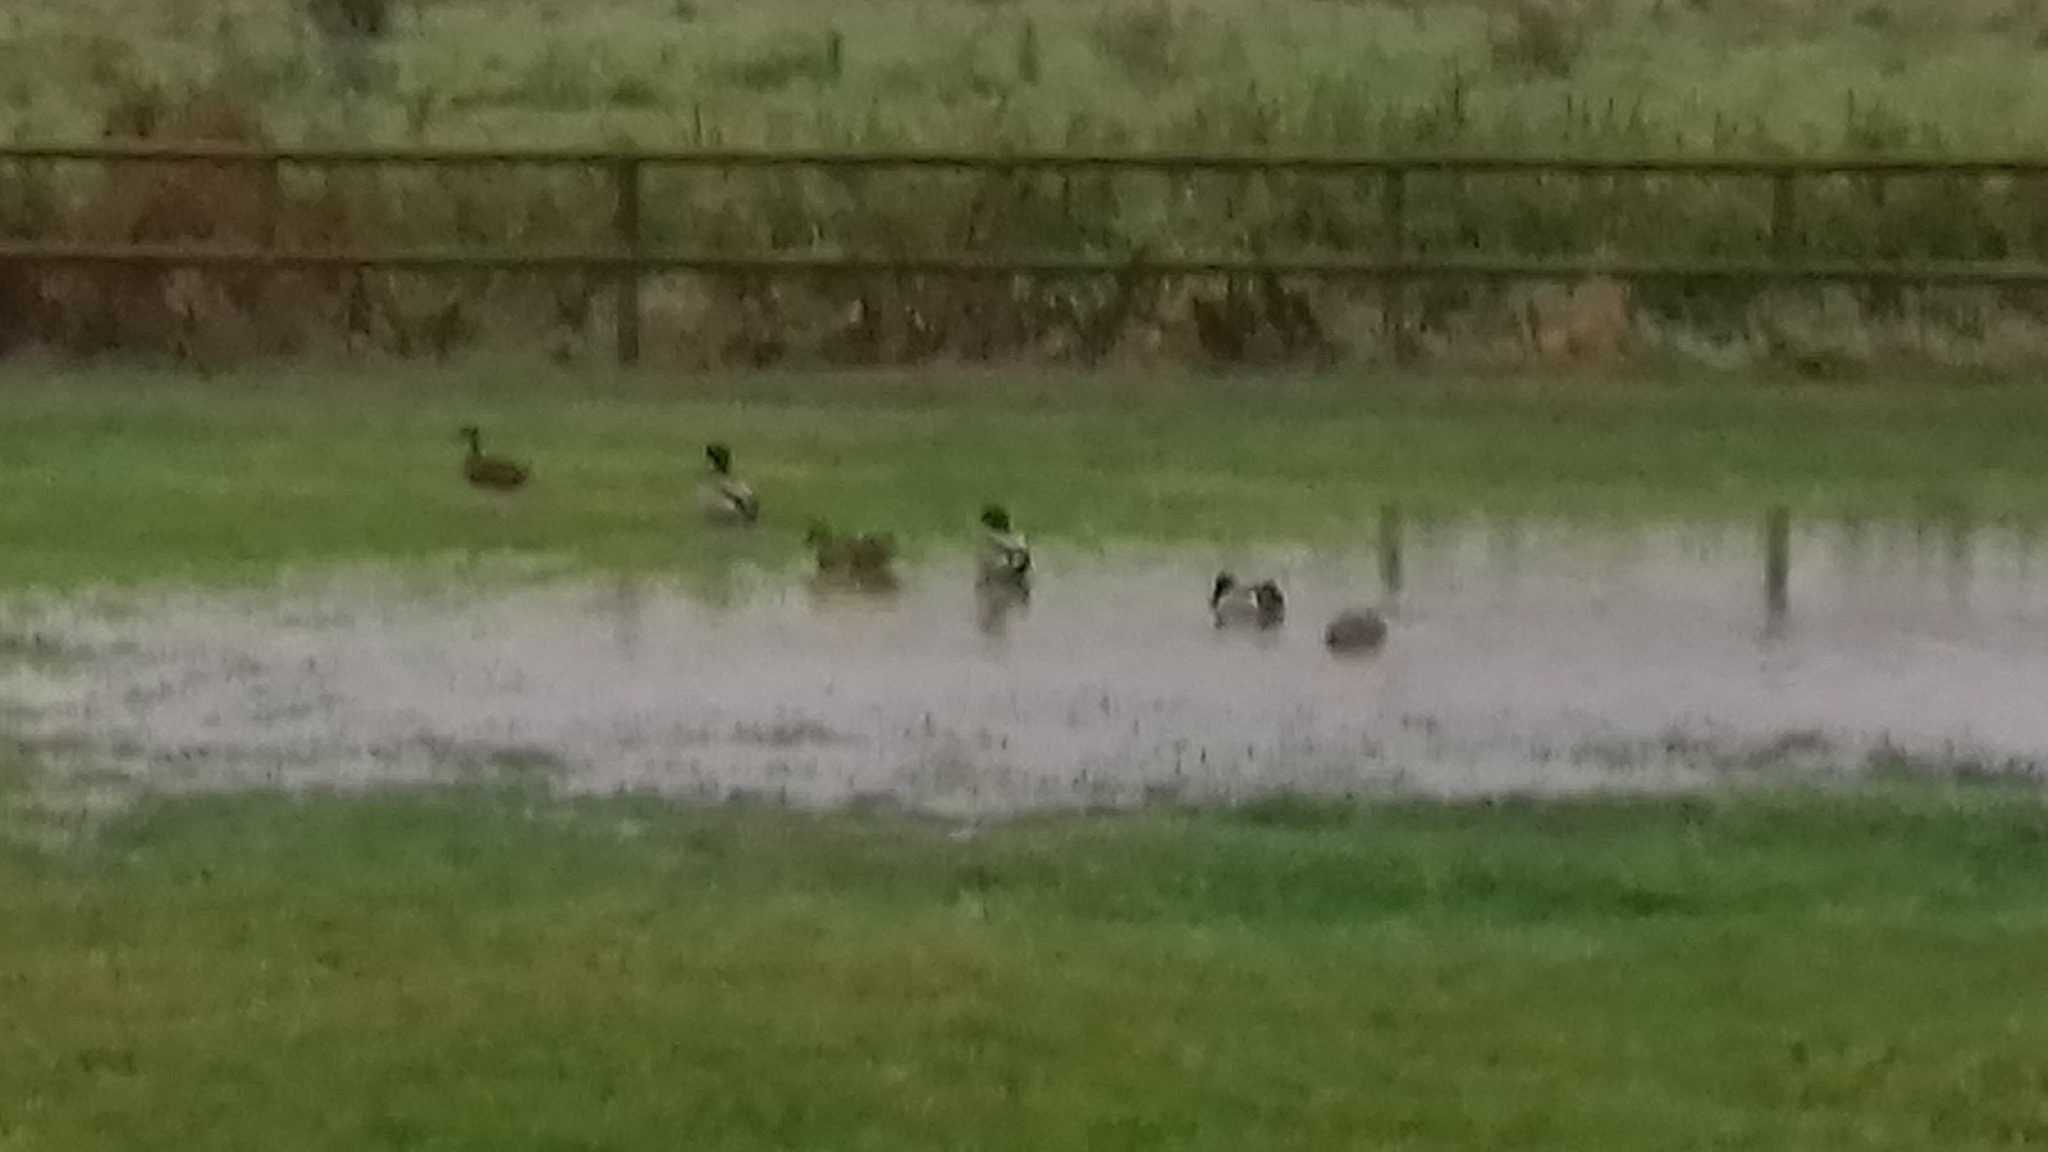 1 Good weather for ducks